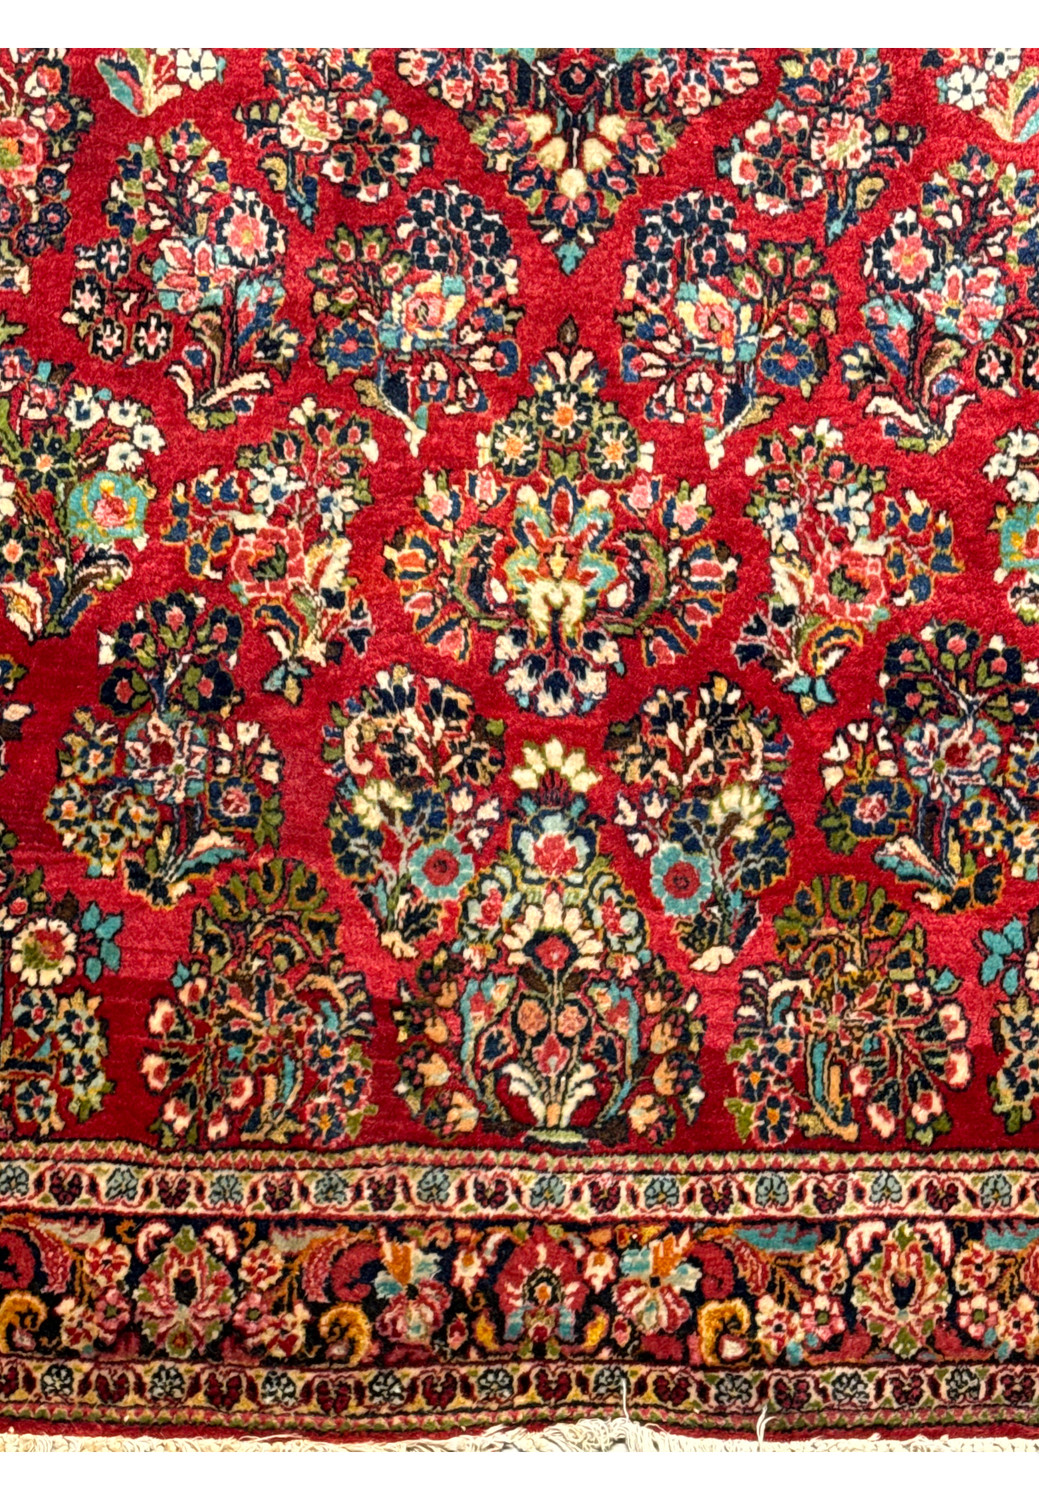 Close-up of the central medallion on the Persian Sarough rug, with a detailed look at the complex patterns and color variations